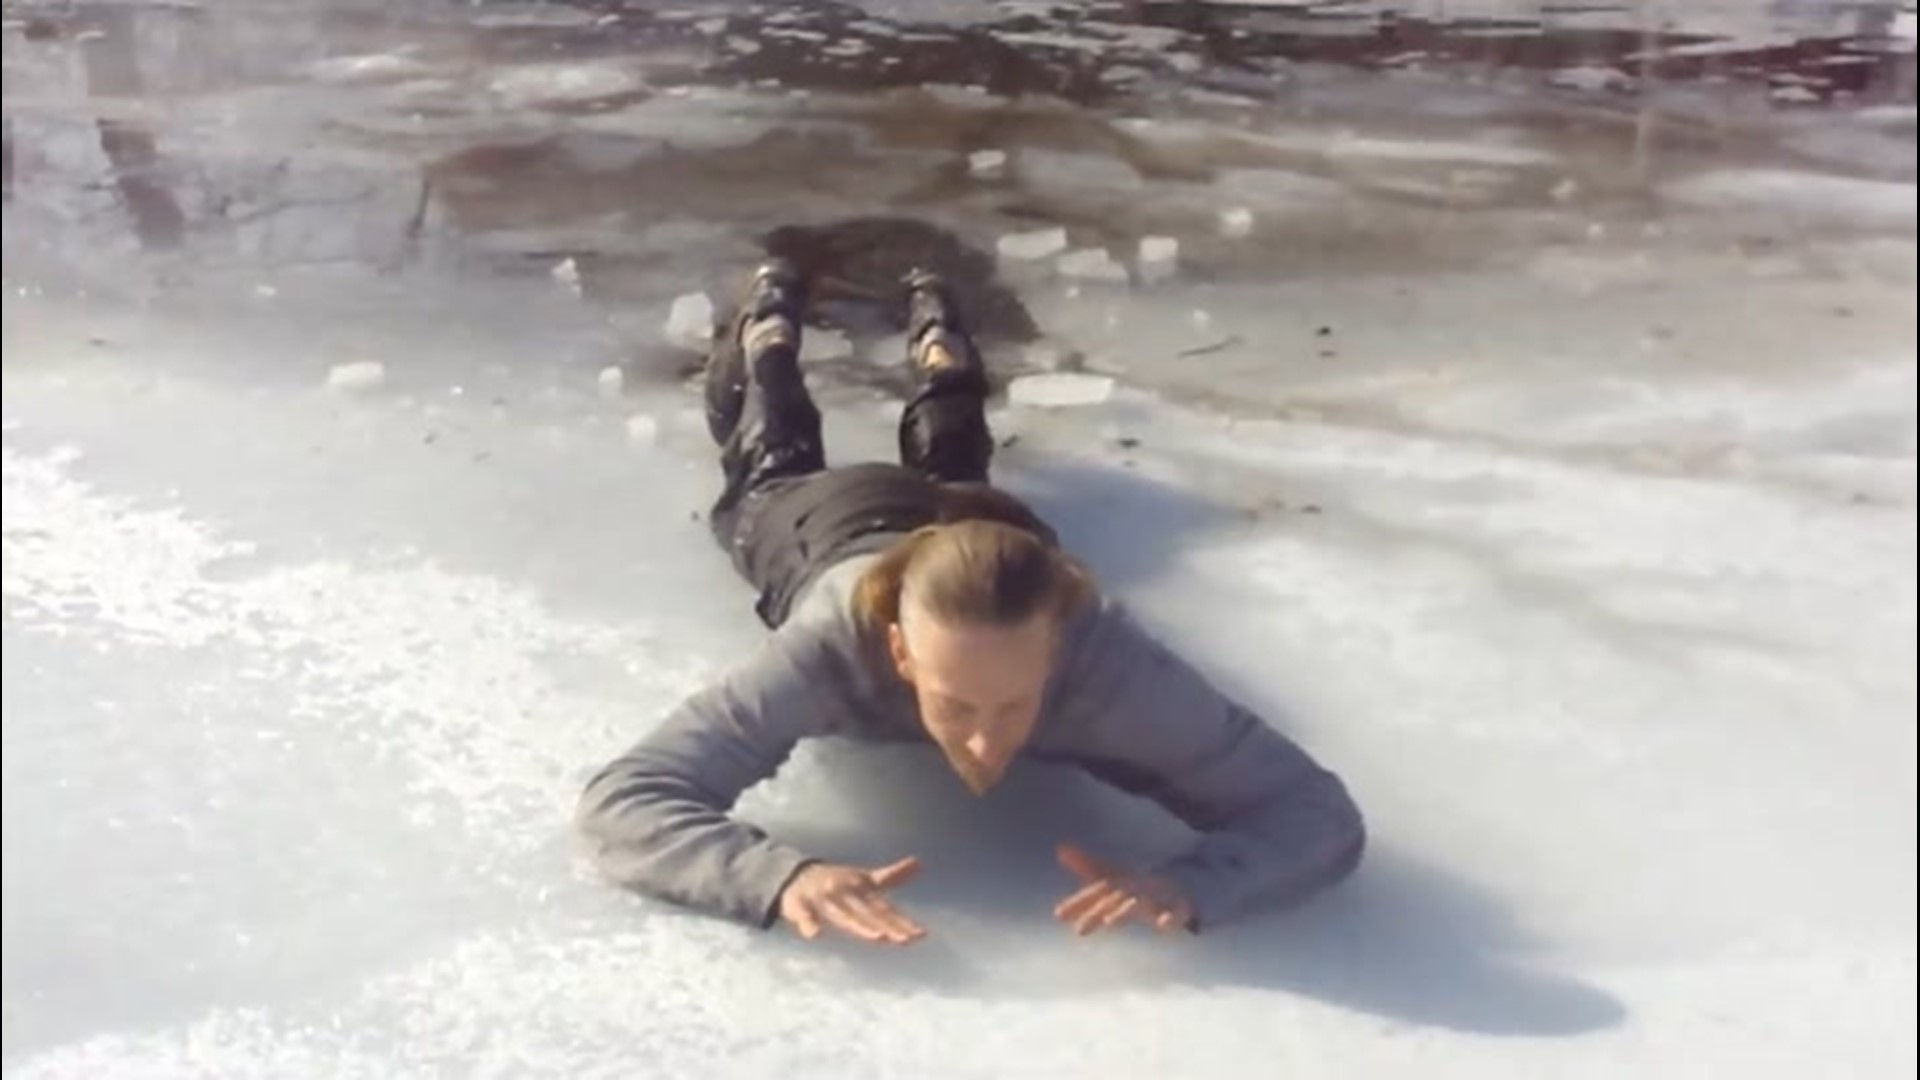 If you ever find yourself falling through ice, what are the immediate steps to take in order to get out? AccuWeather meteorologist goes over how to escape.